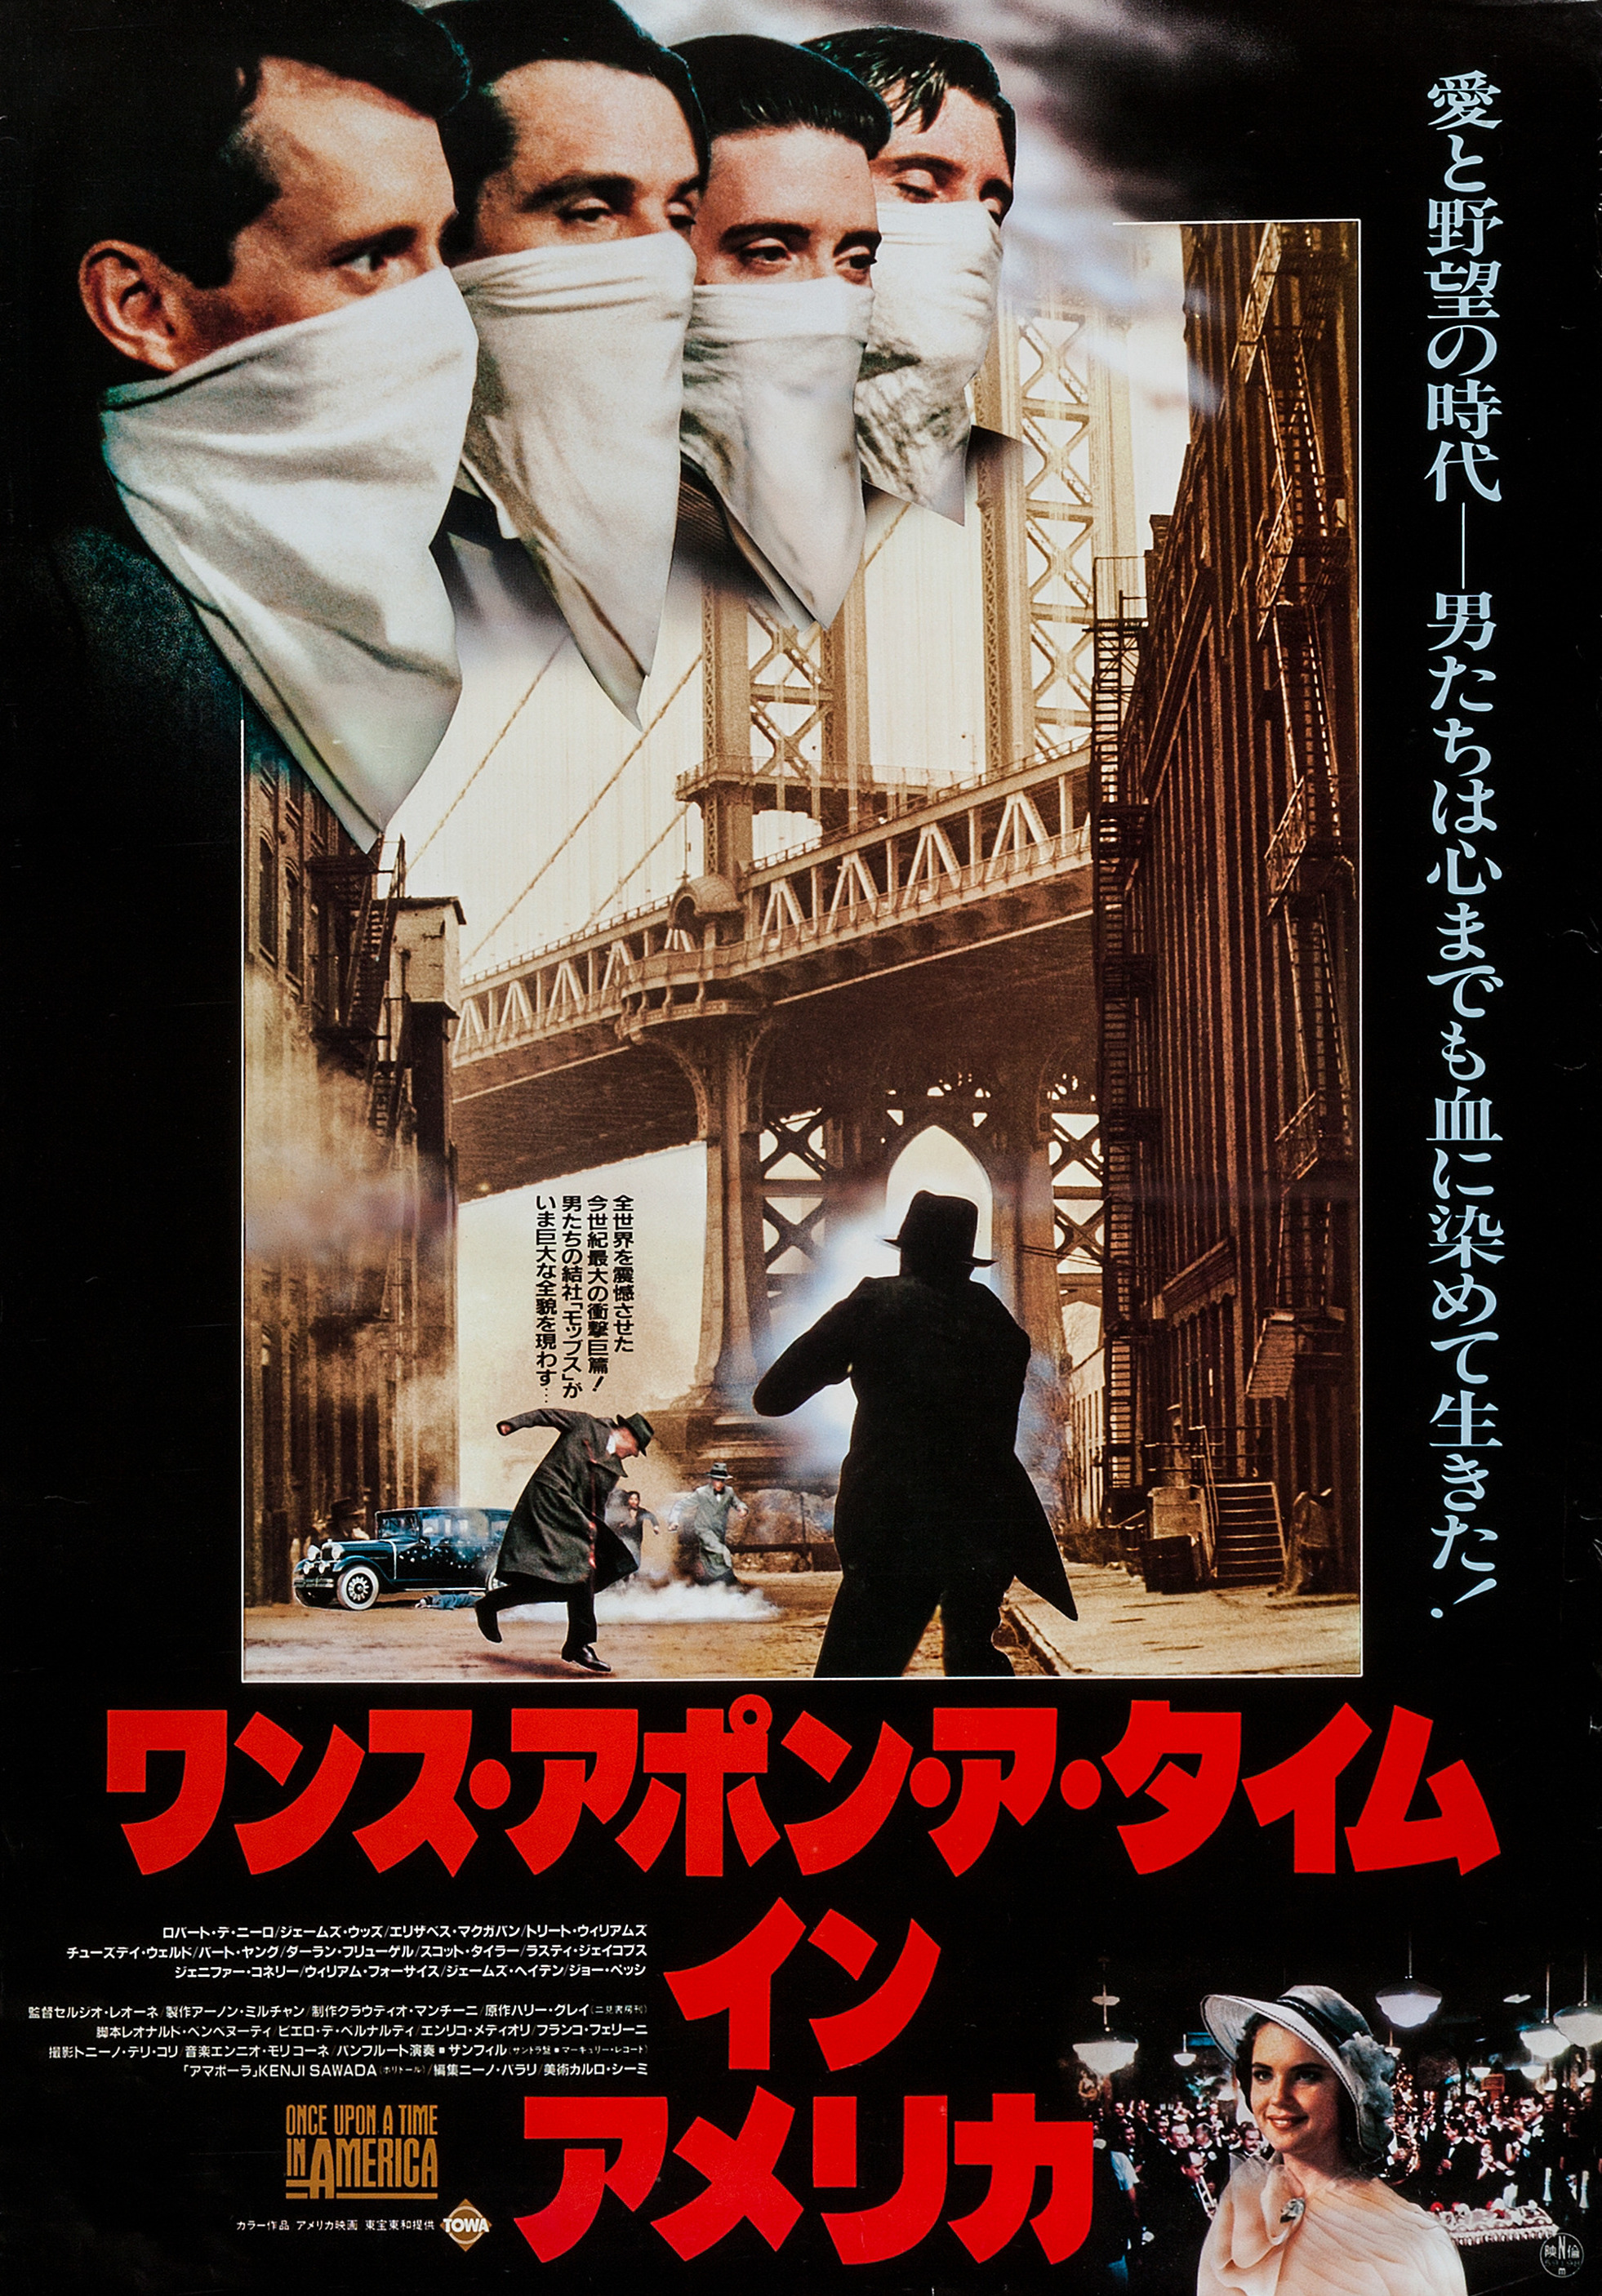 Mega Sized Movie Poster Image for Once Upon a Time in America (#4 of 6)